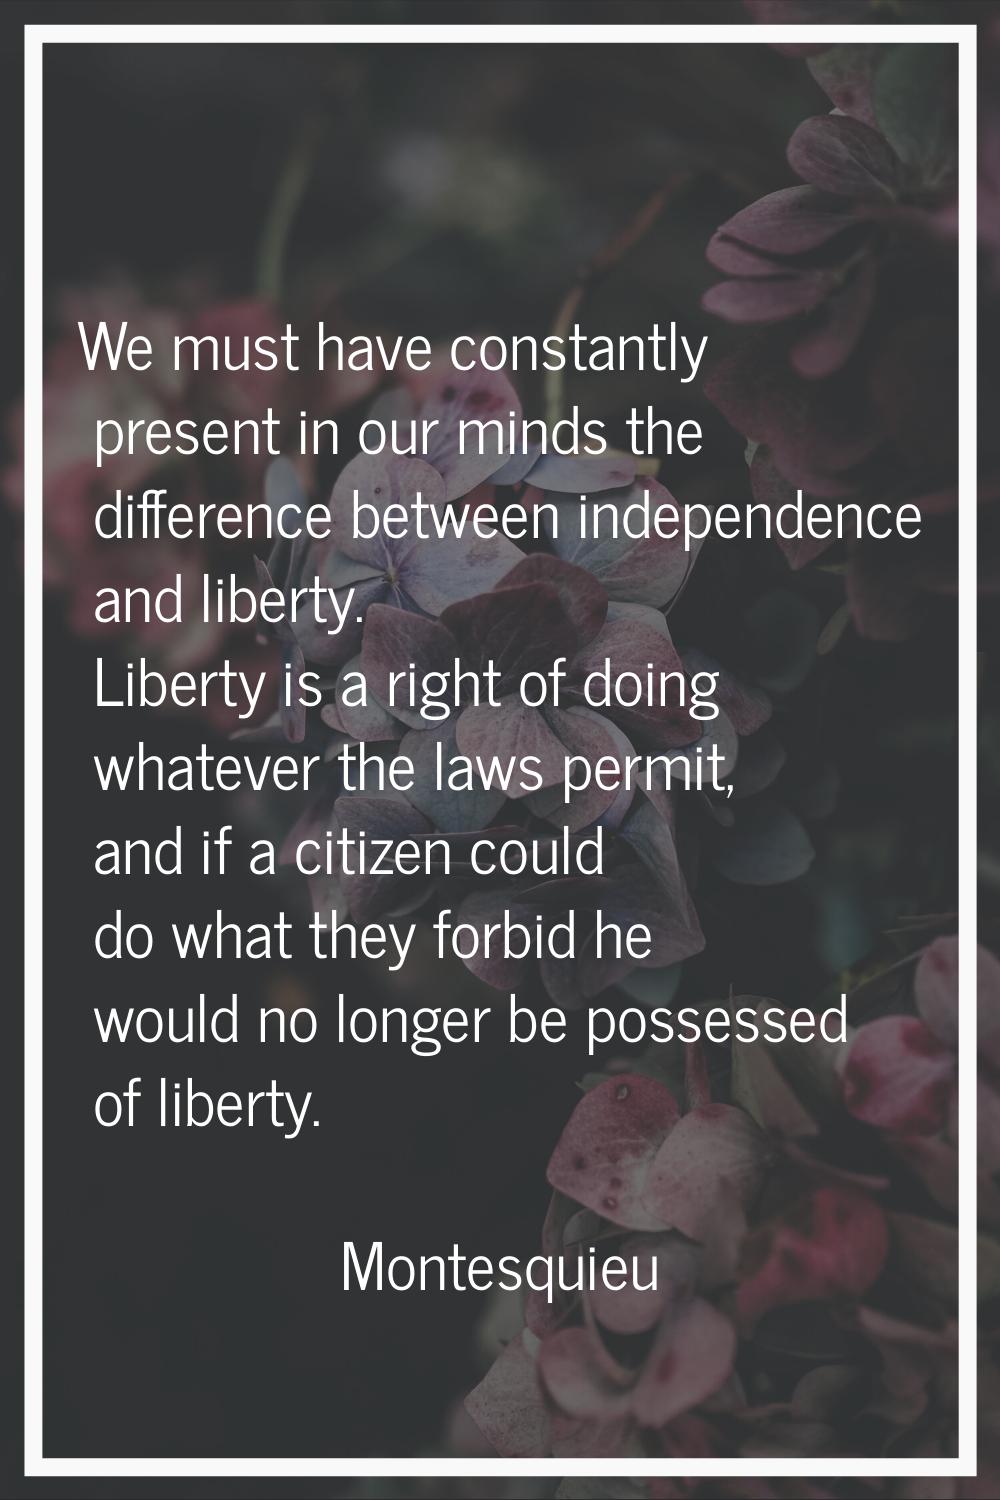 We must have constantly present in our minds the difference between independence and liberty. Liber